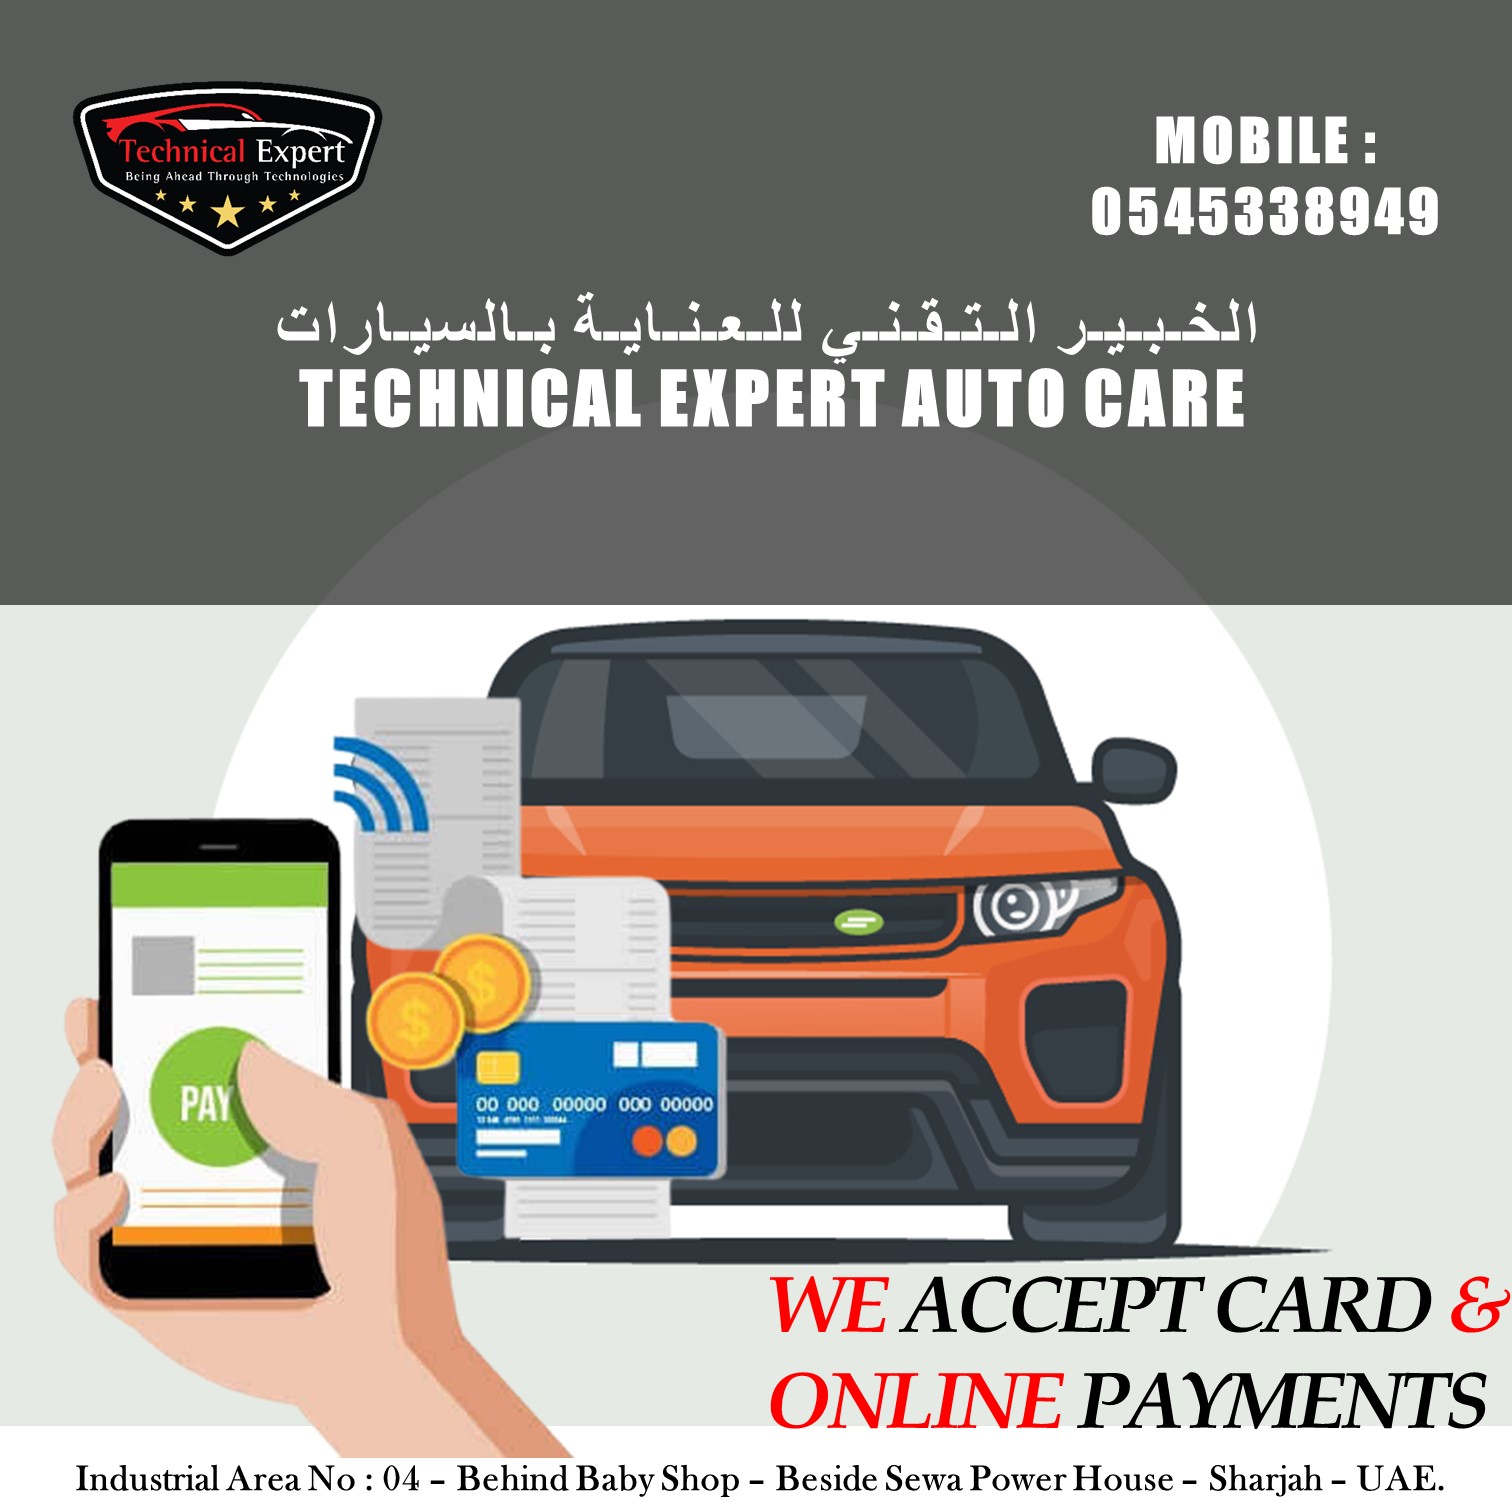 For Car Service Credit Card Payment Accepted in Sharjah